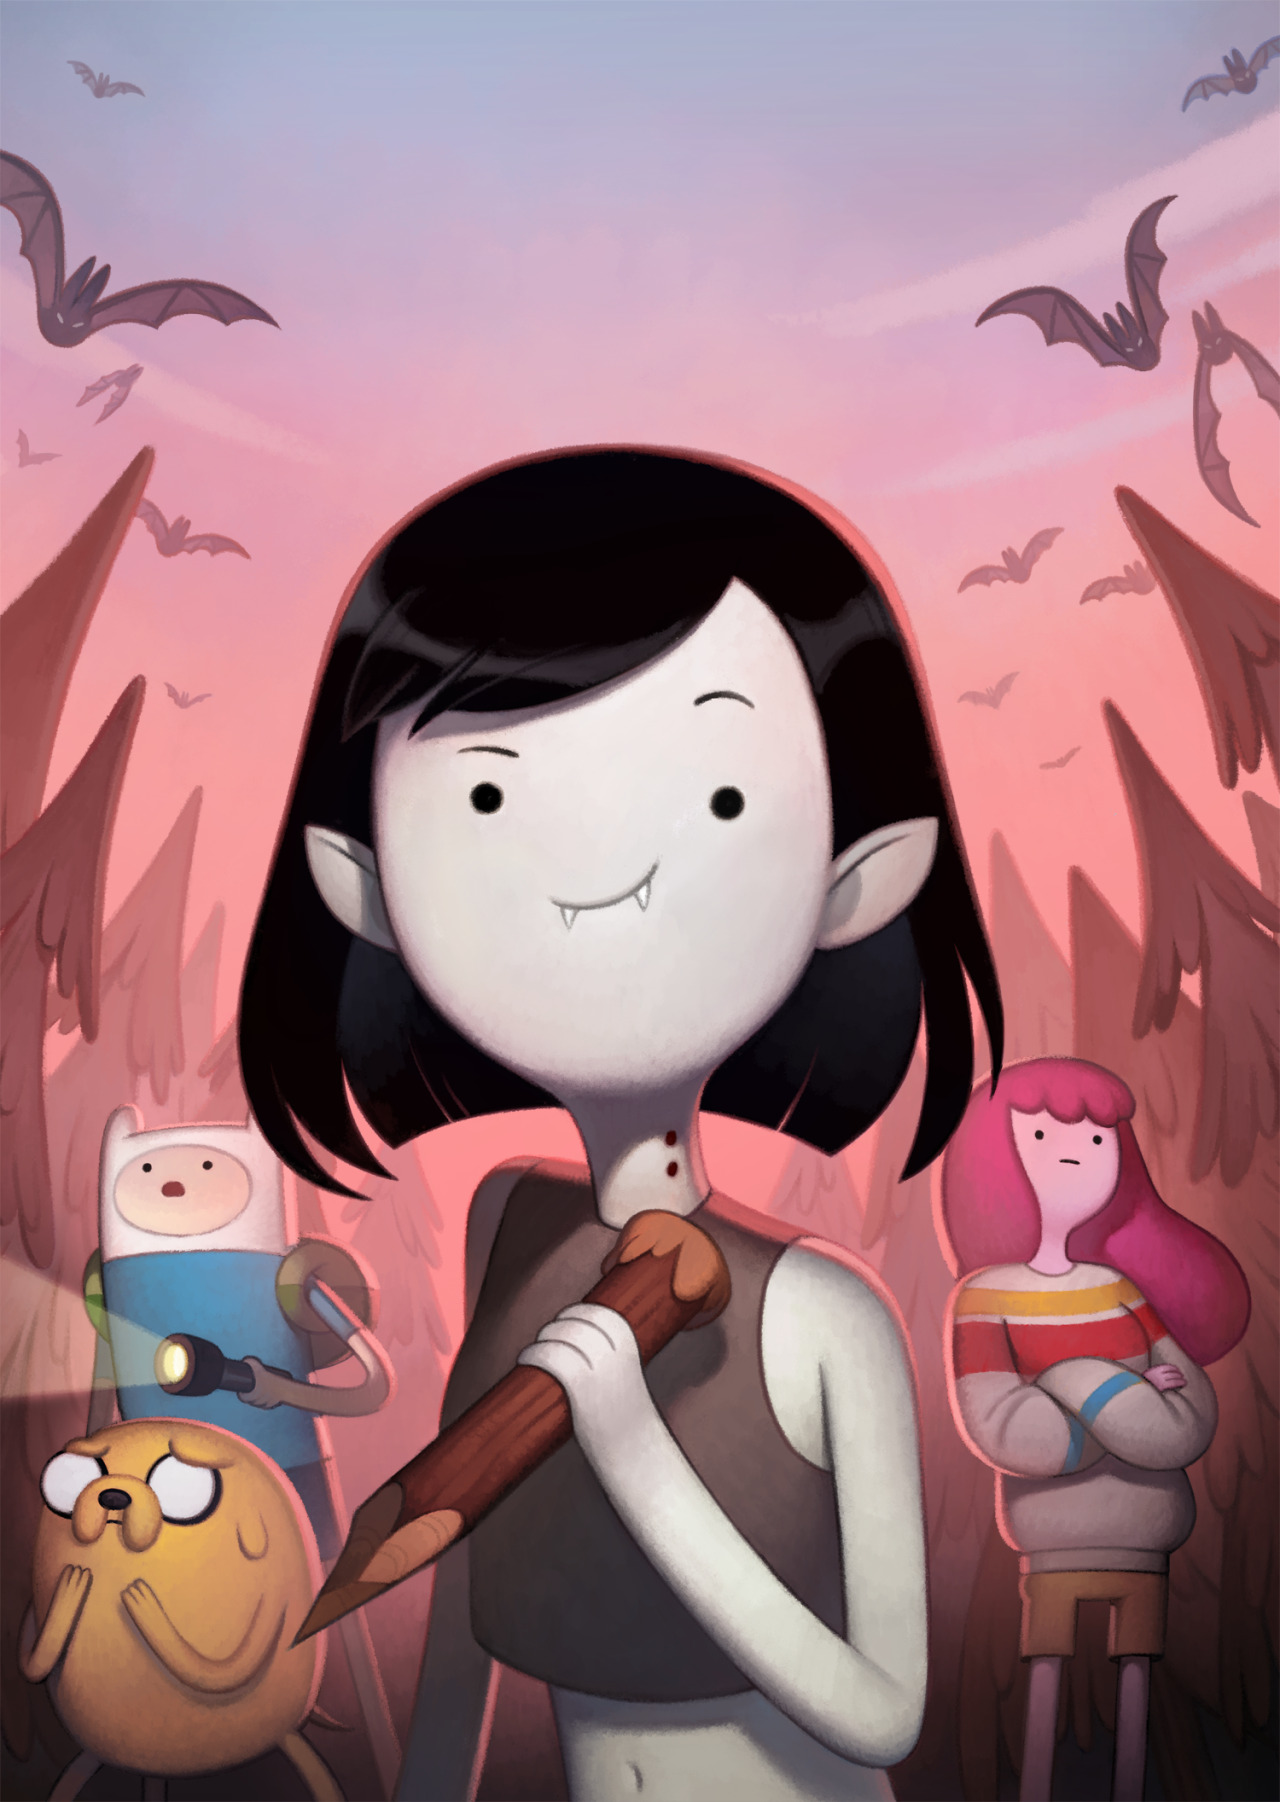 Adventure Time: Stakes DVD cover artwork designed and painted by character &amp;